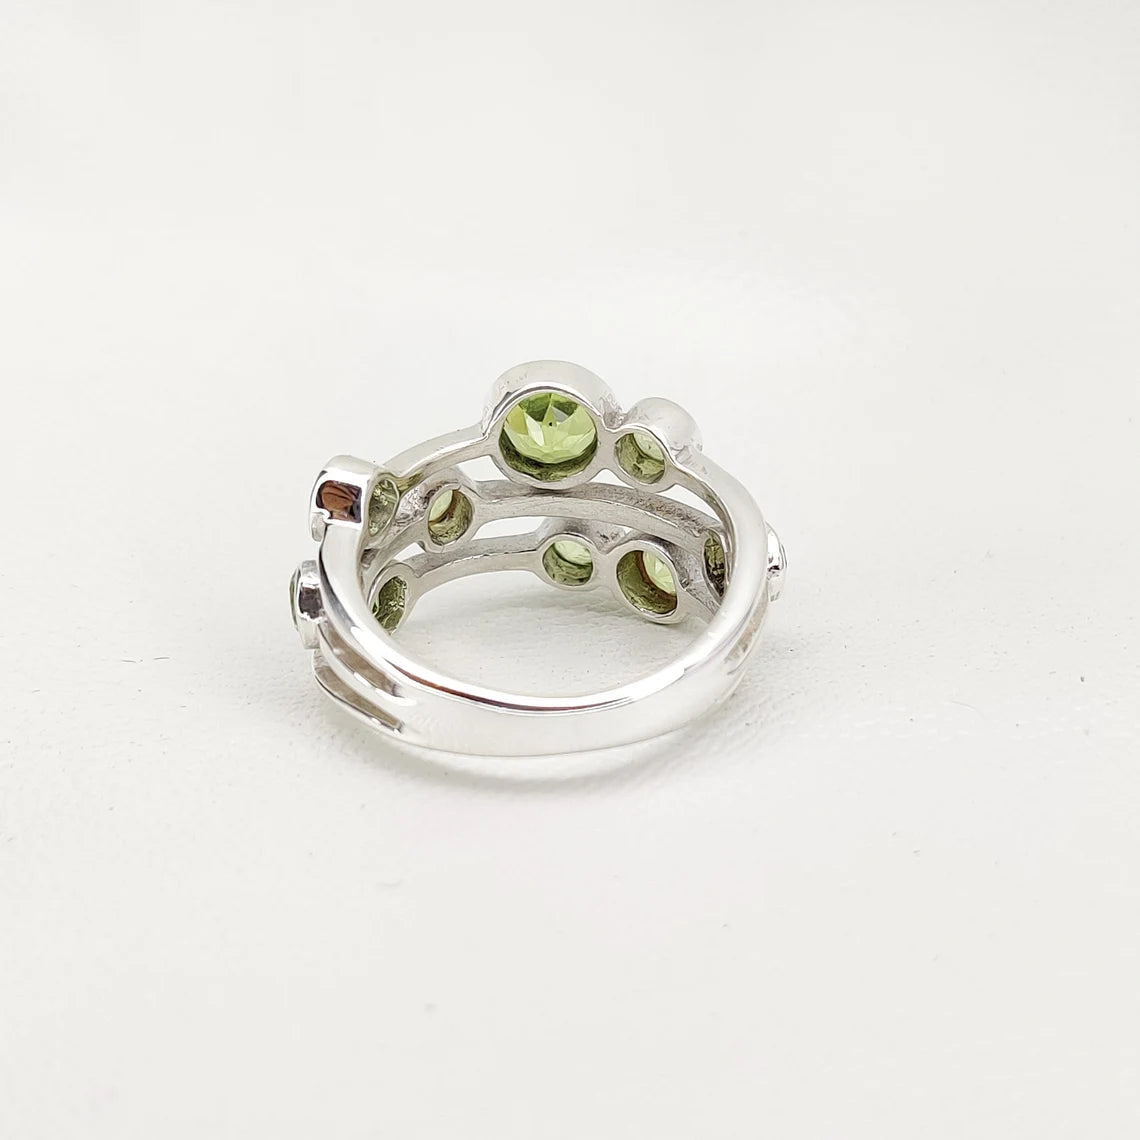 Peridot Ring, Green Bubbles Ring, August Birthstone, Natural Gemstone, Sterling Silver Ring, Modern Ring, Multi Stone Ring, Unique Gift